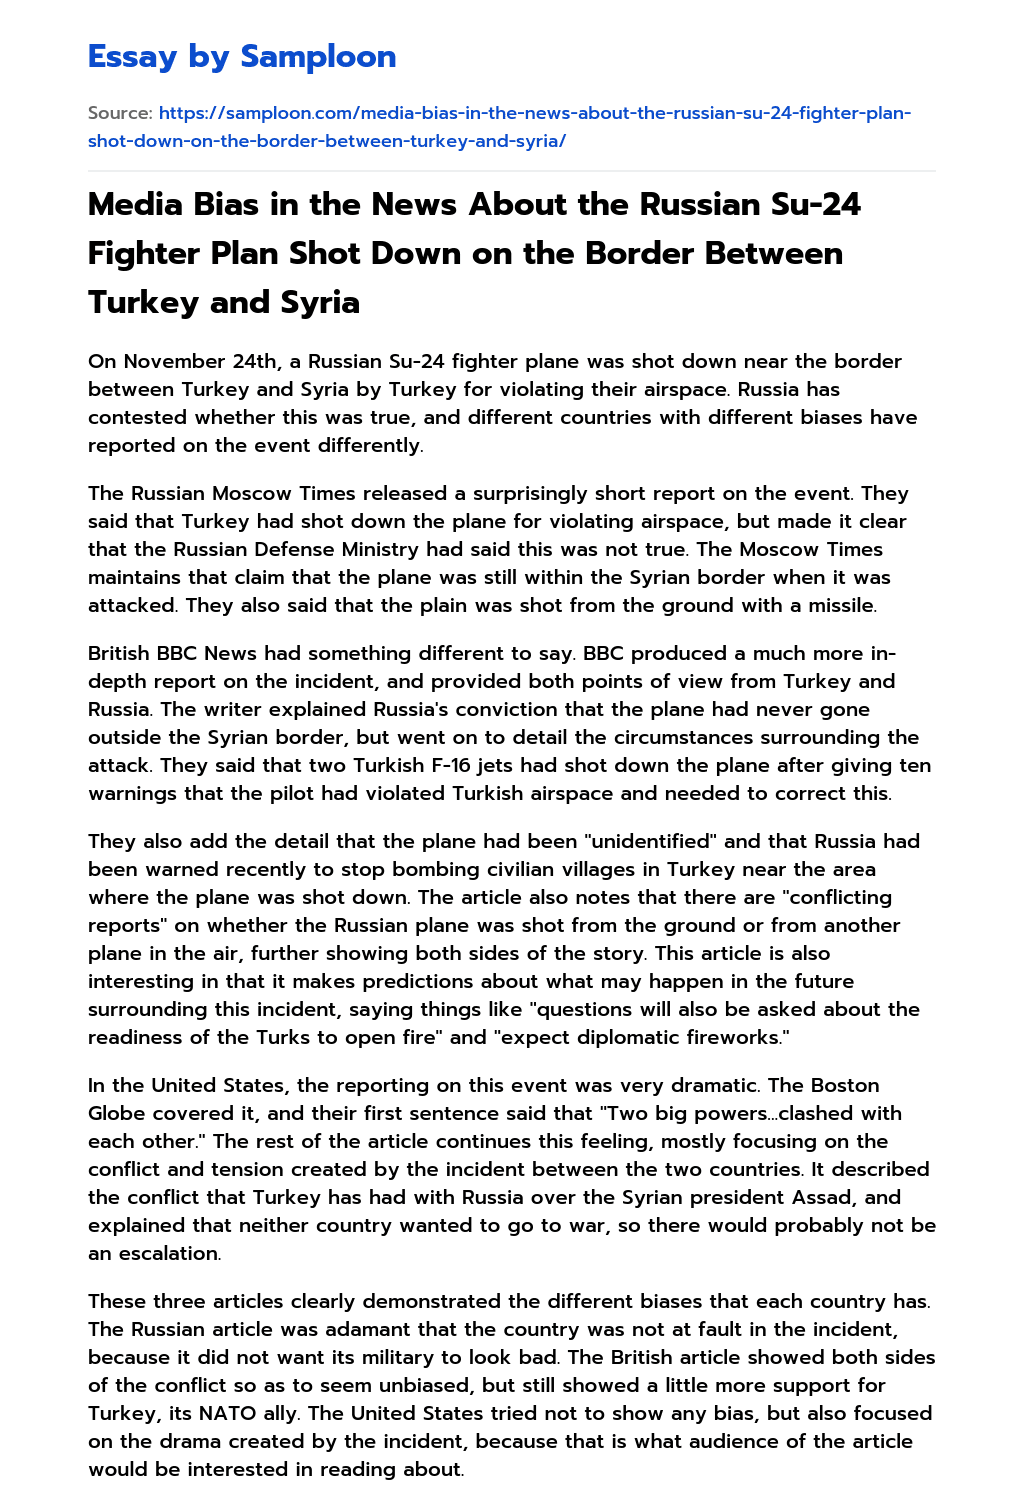 Media Bias in the News About the Russian Su-24 Fighter Plan Shot Down on the Border Between Turkey and Syria essay